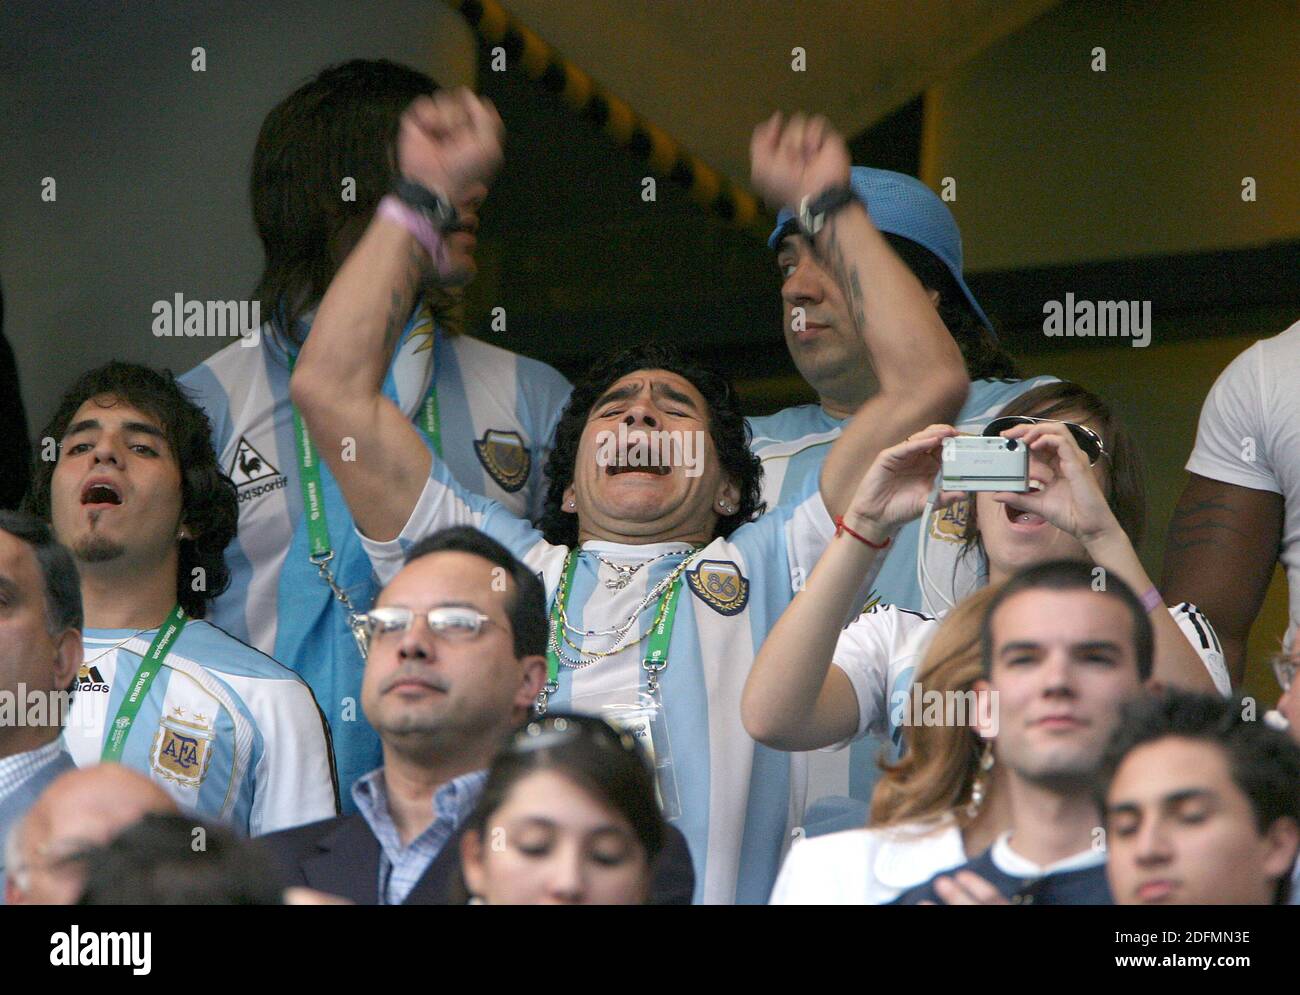 File photo - Argentina's soccer legend Diego Maradona and his daughter Giannina celebrate in the stands after Agentina won the match during the World Cup 2006, Second round, Argentina vs Mexico at the Zentralstadion stadium in Leipzig, Germany on June 24, 2006. Argentina won 2-1. Diego Maradona has died from a heart attack just days after turning 60. The Argentinian football legend died at home, his lawyer said, just two weeks after having surgery on a blot clot in his brain. Widely regarded as one of the greatest players of all time on the pitch, his life off the pitch was equally notorious - Stock Photo